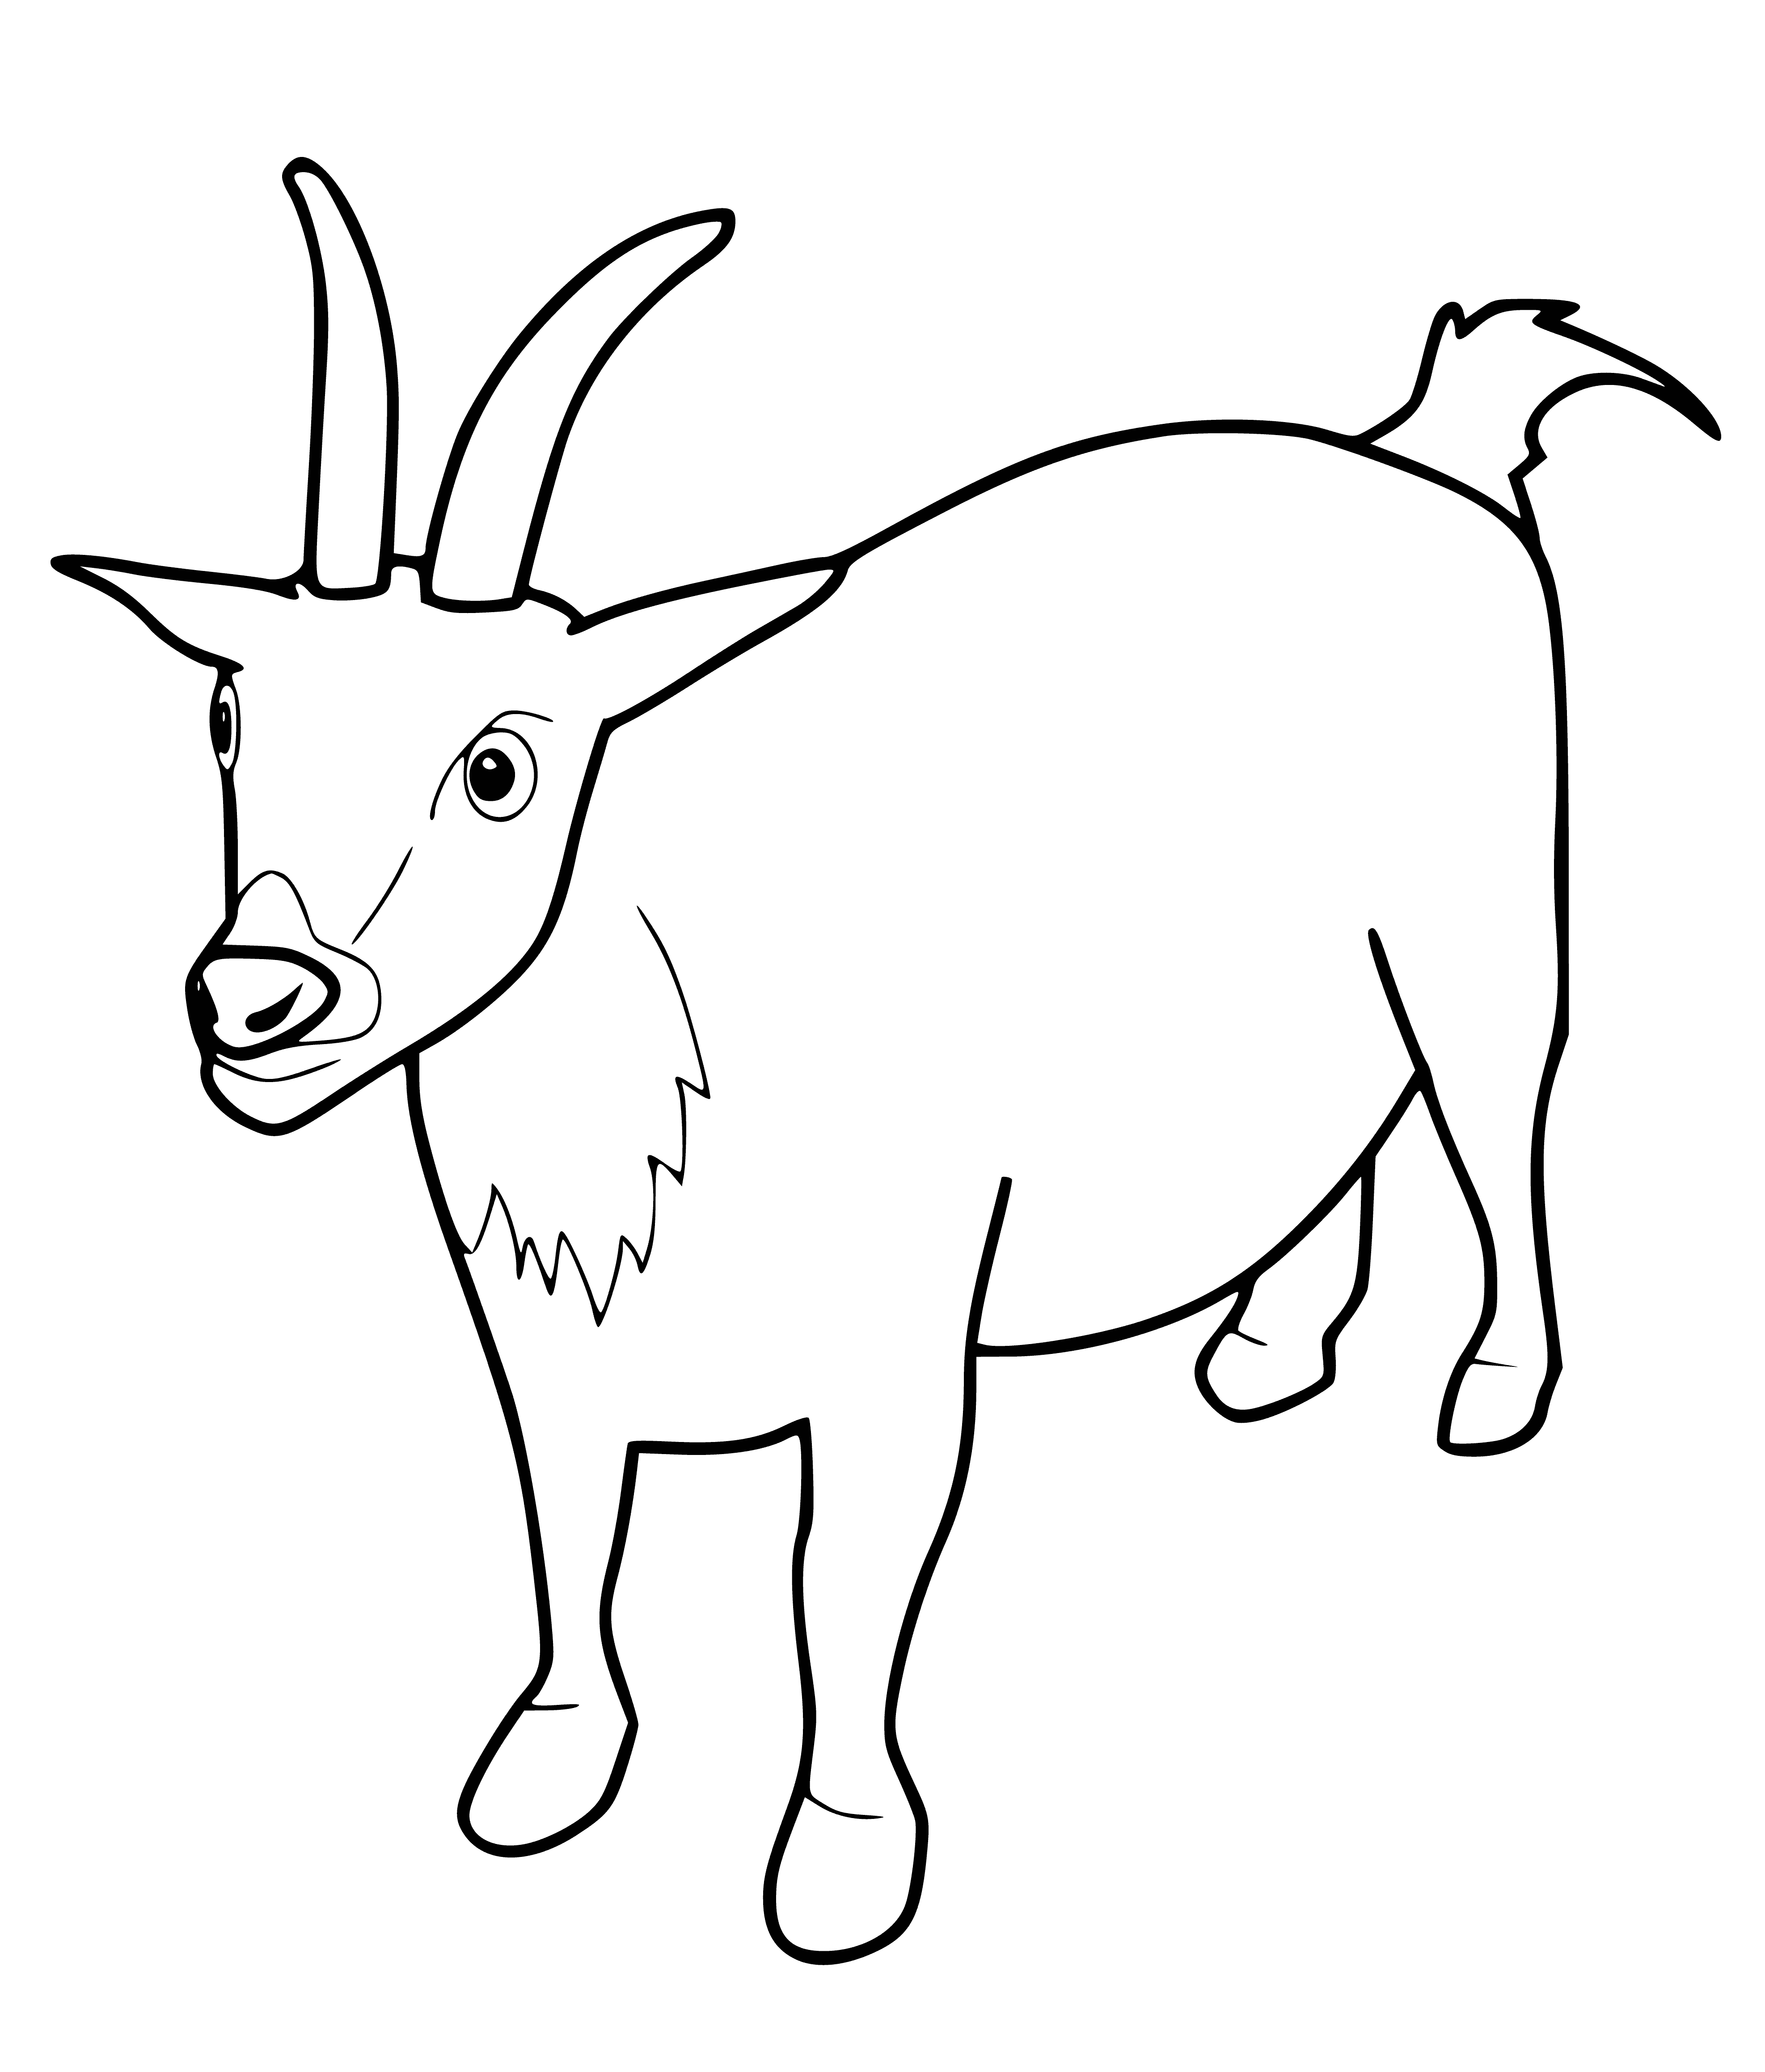 coloring page: Goats are four-legged mammals w/ horns, social animals that eat vegetation in herds.